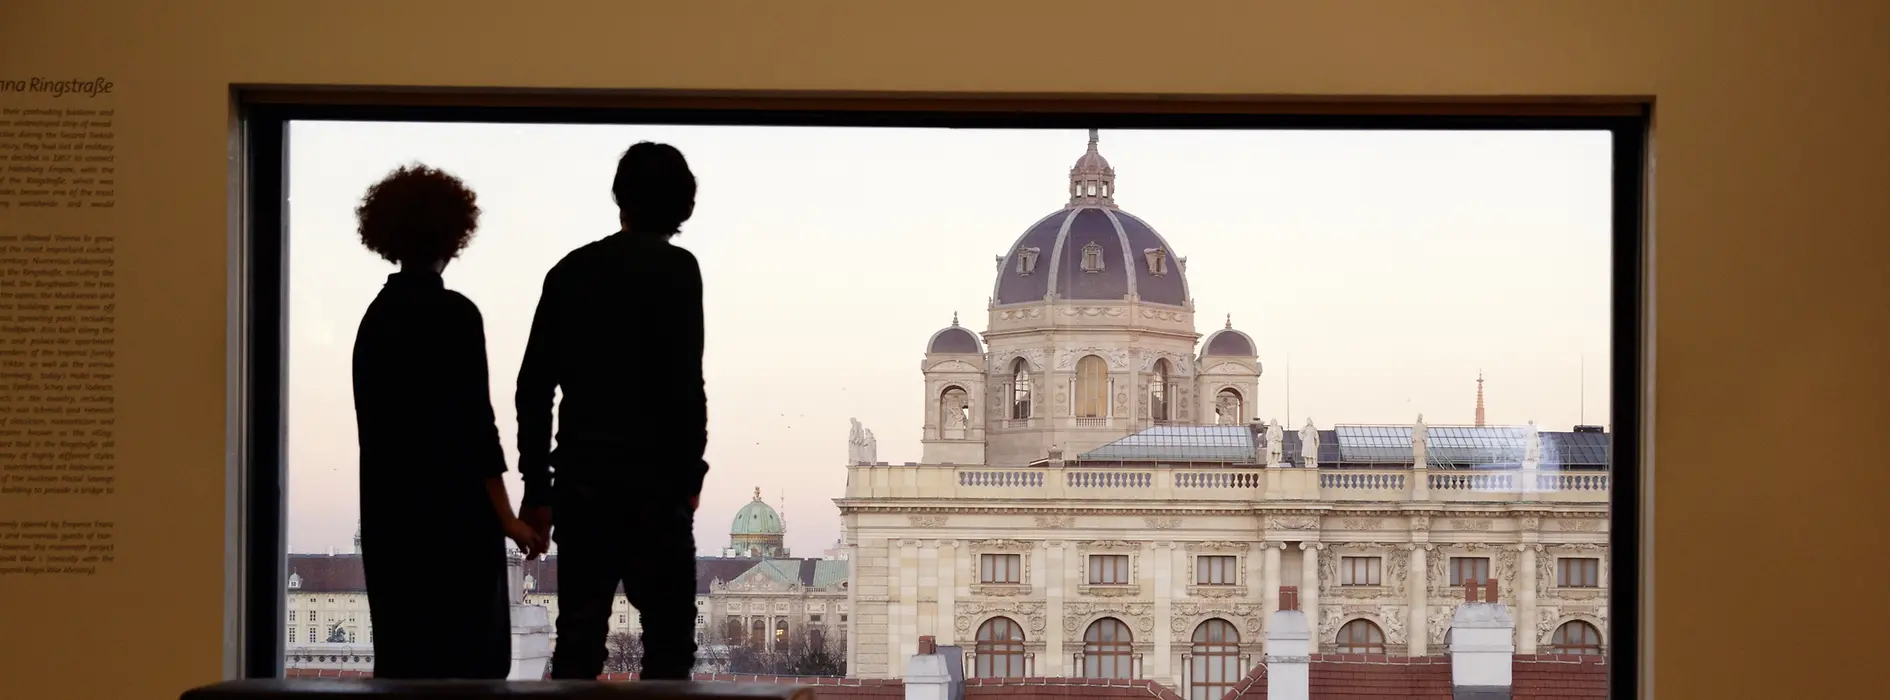 2 people in front of a big window looking at the Kunsthistorische Museum